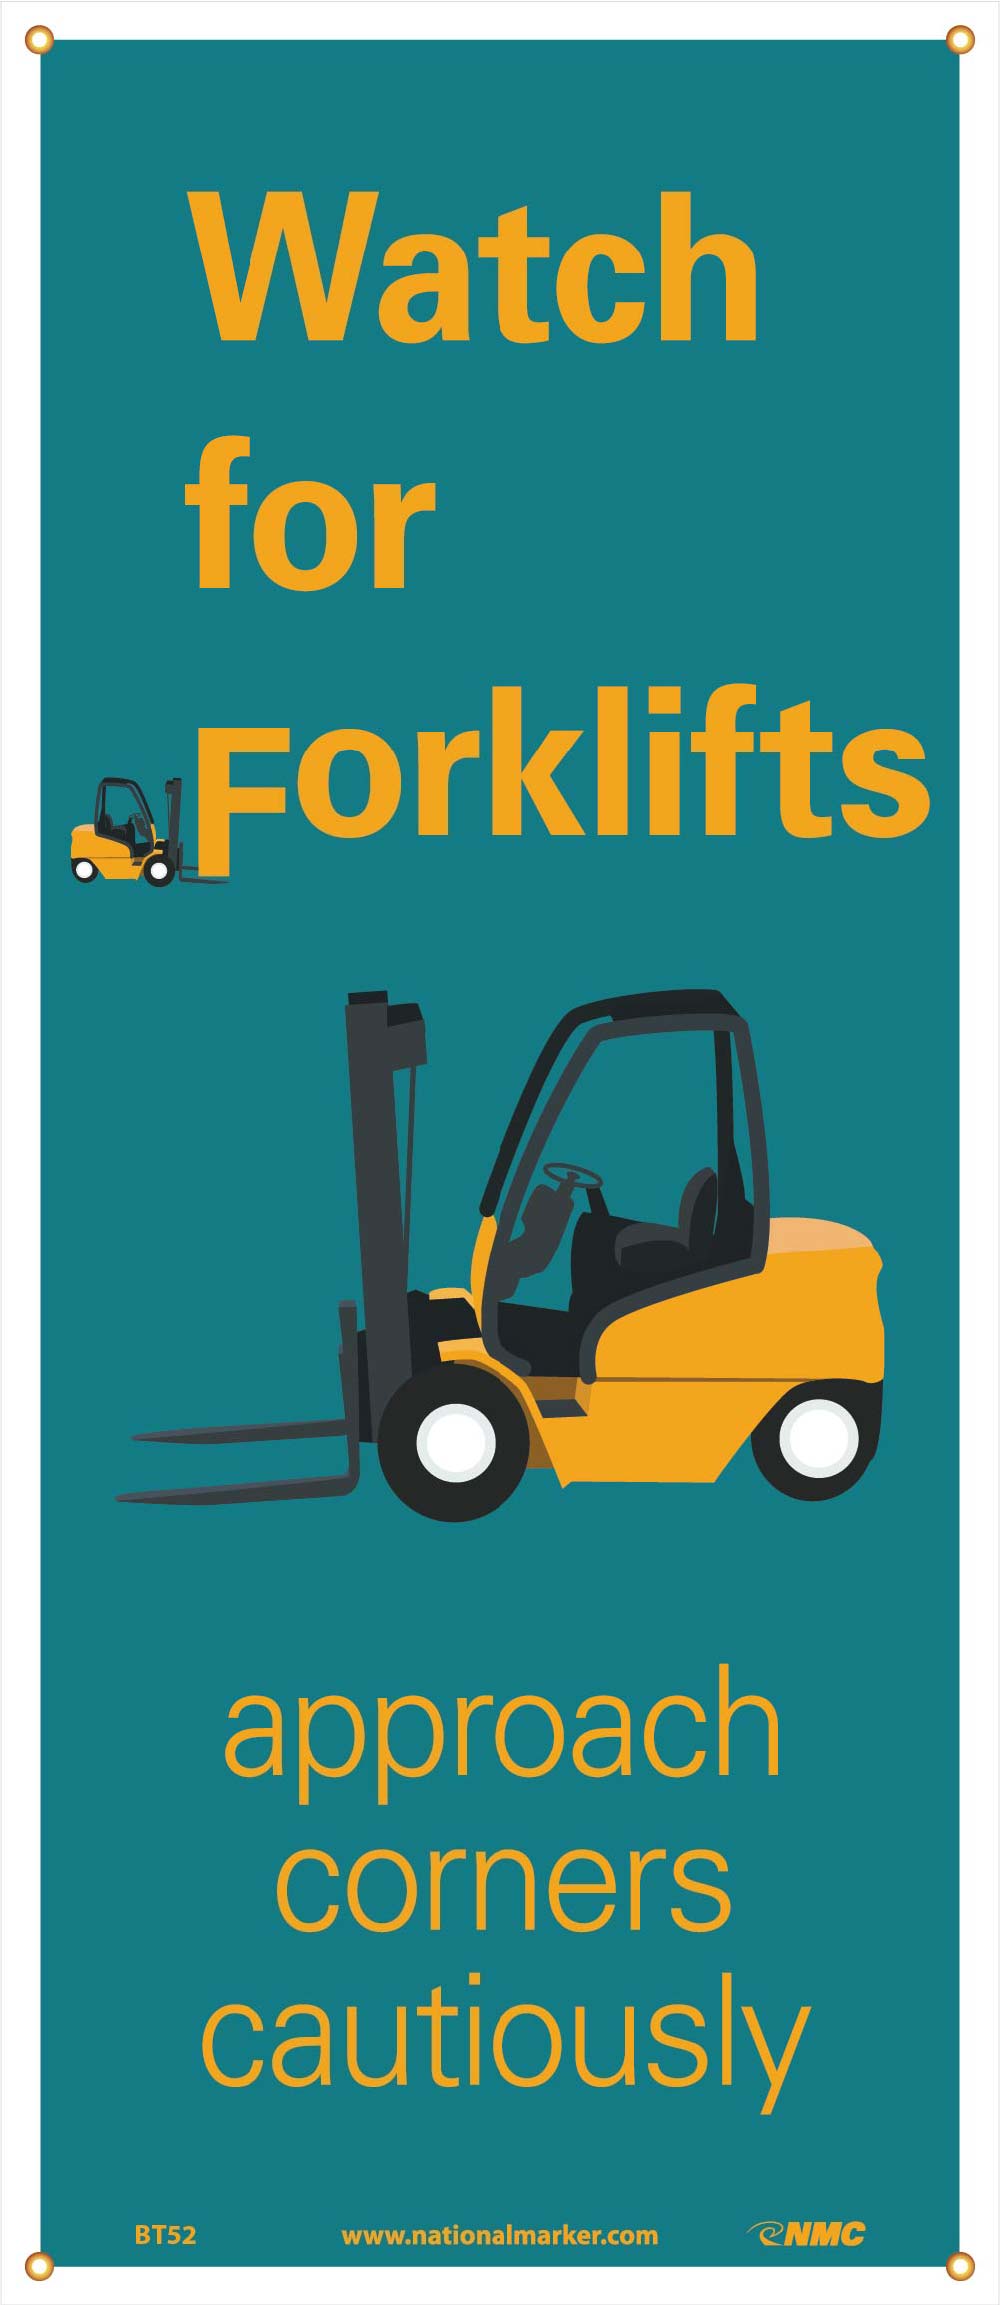 Watch For Forklifts Banner-eSafety Supplies, Inc